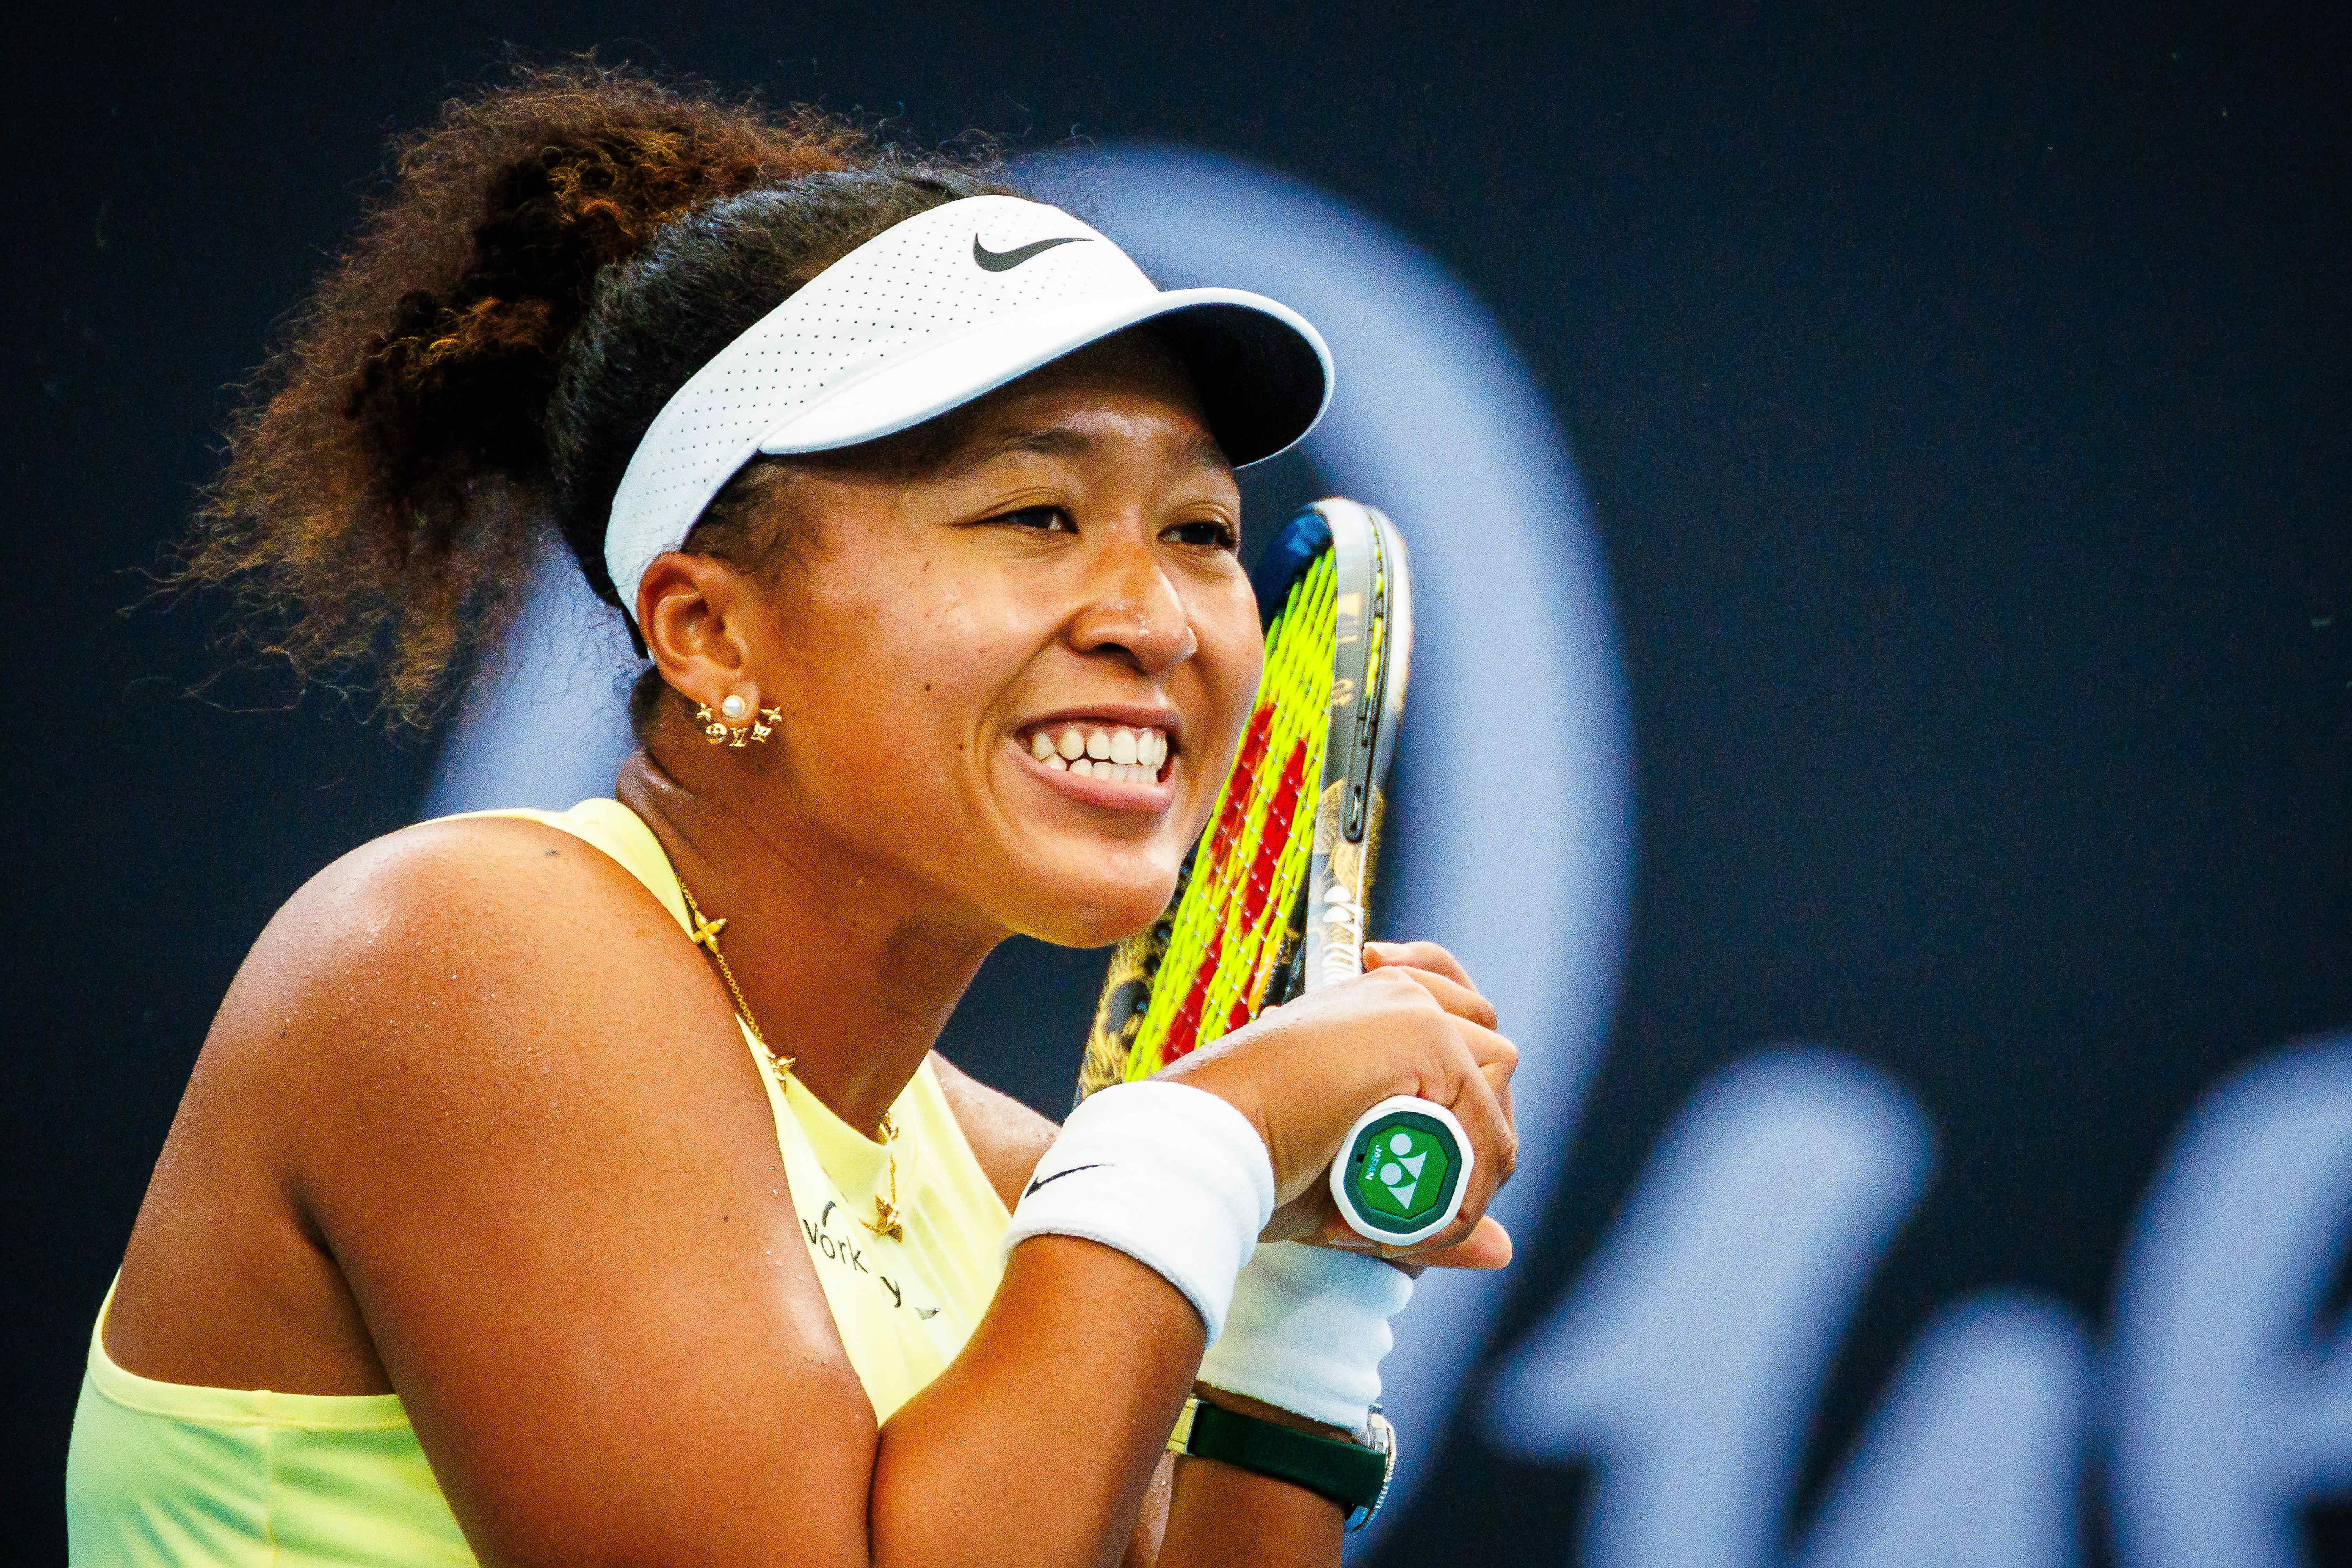 In Japan, Naomi Osaka Is an Object of Adoration and Fascination. But It’s Complicated. Ben Rothenberg